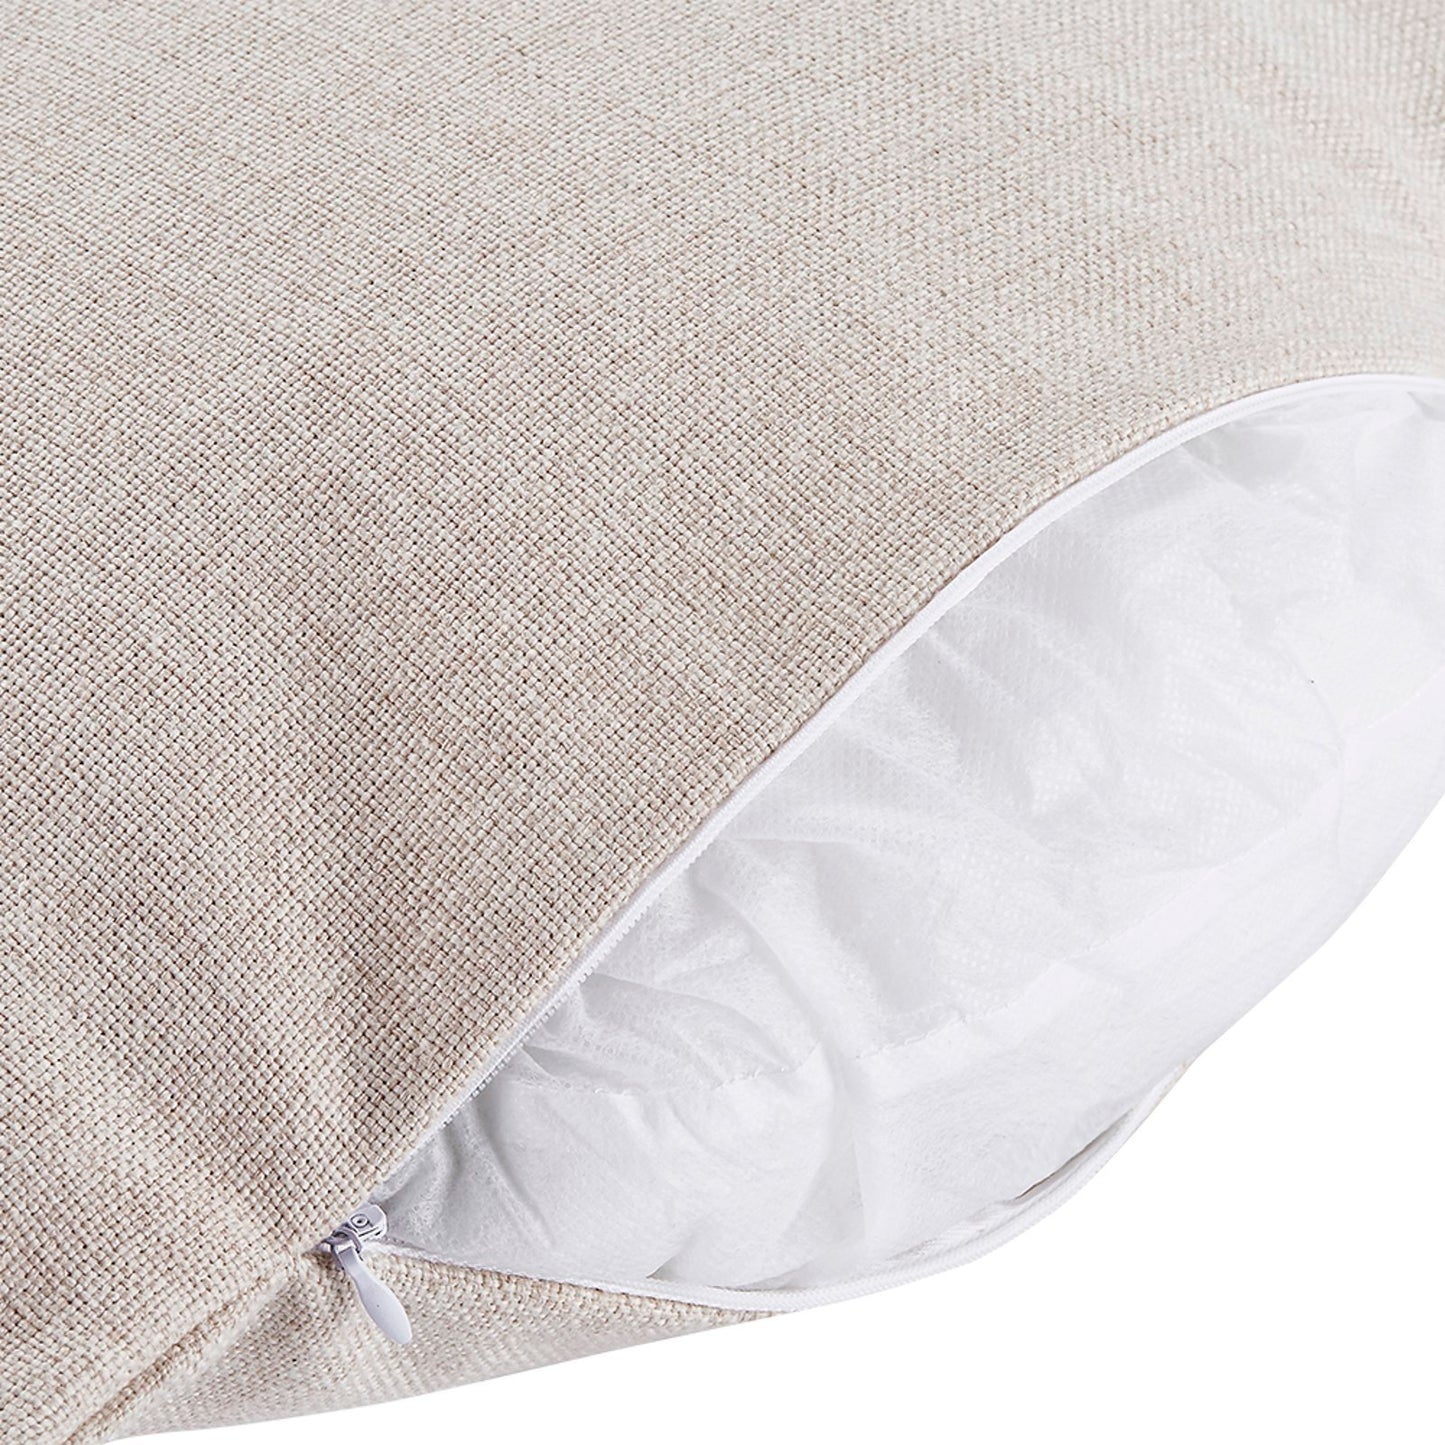 Online Custom Cotton Linen Pillow Case Set of 4 Single-sided Printing Only Pillowcase